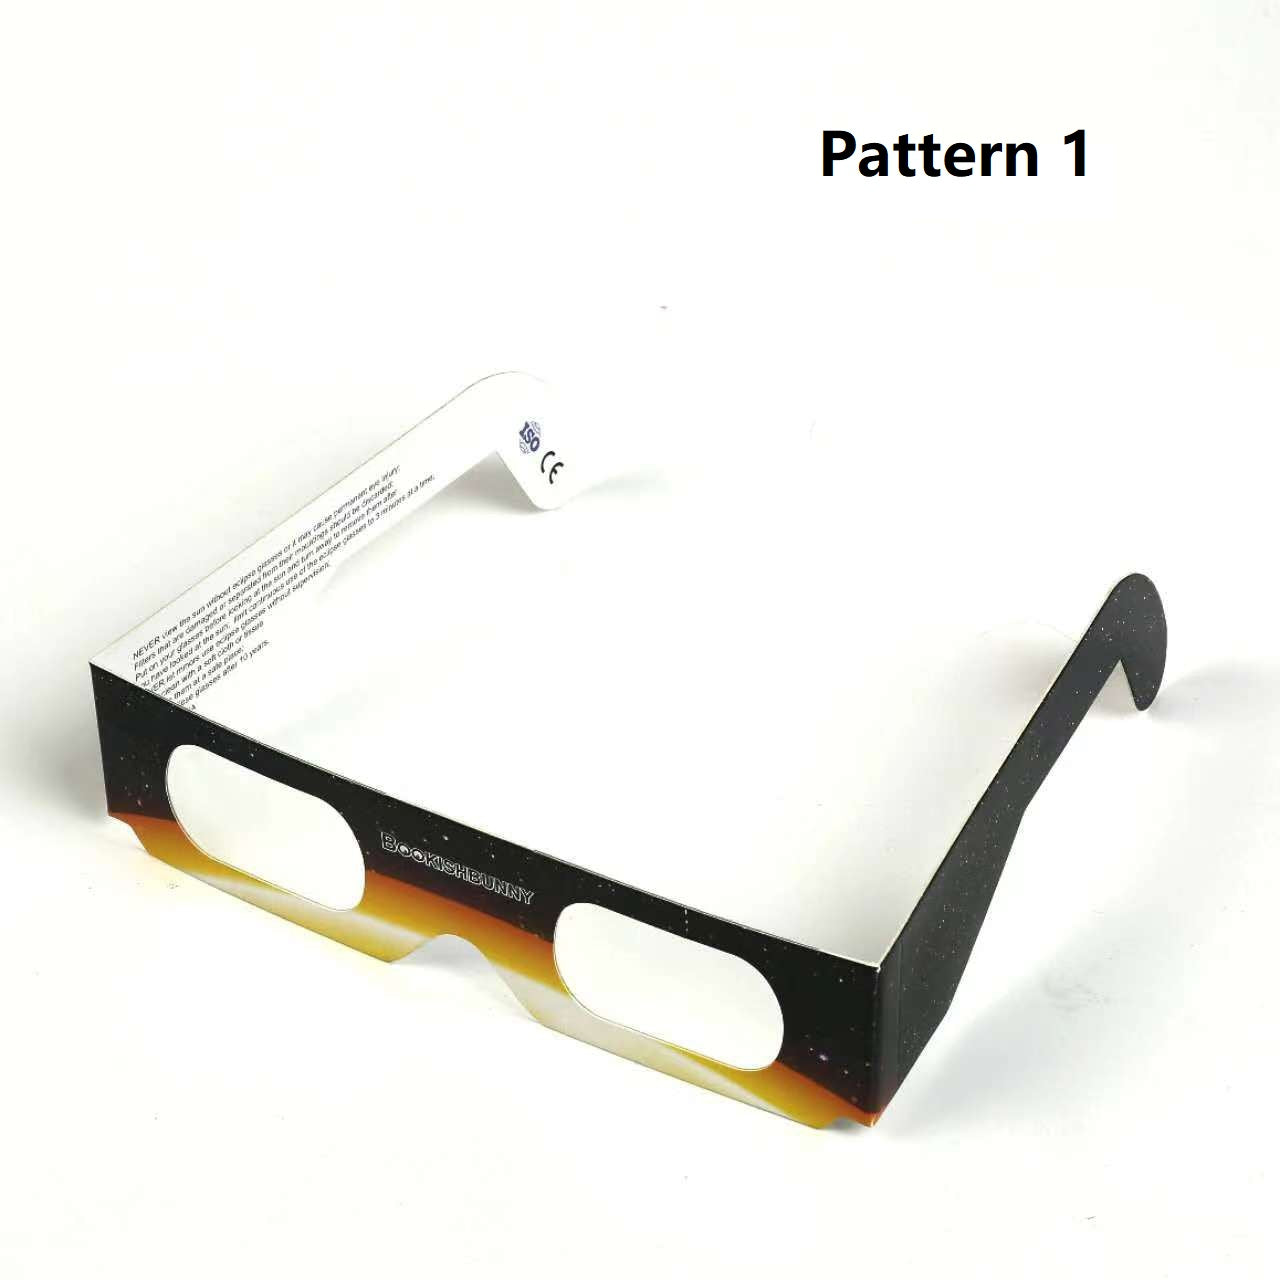 10 Pairs Bookishbunny Solar Eclipse Viewers Paper Glasses Sun Viewing Mixed Patterns